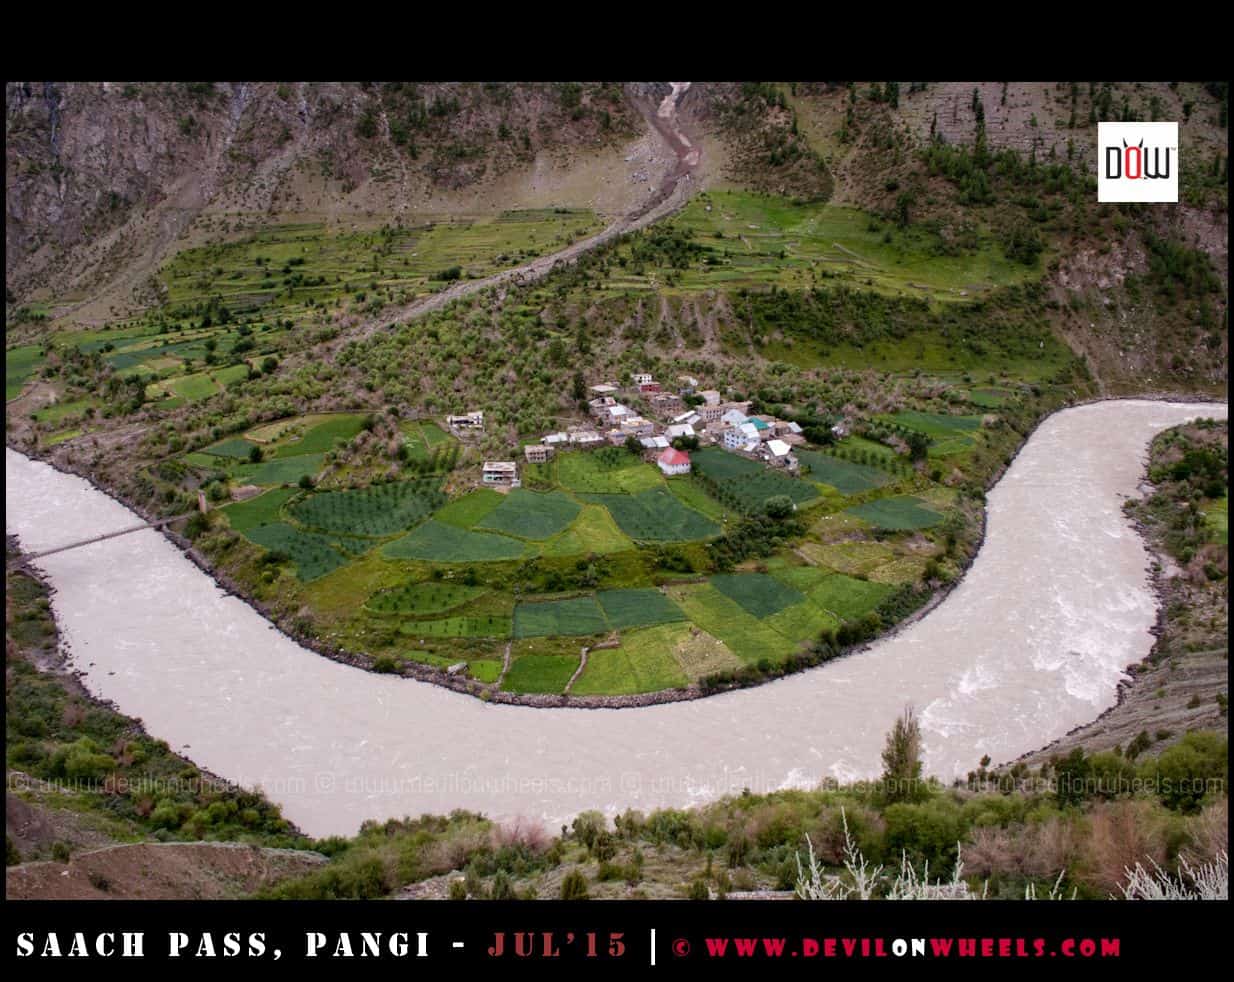 An amazingly beautiful village in Lahaul Valley